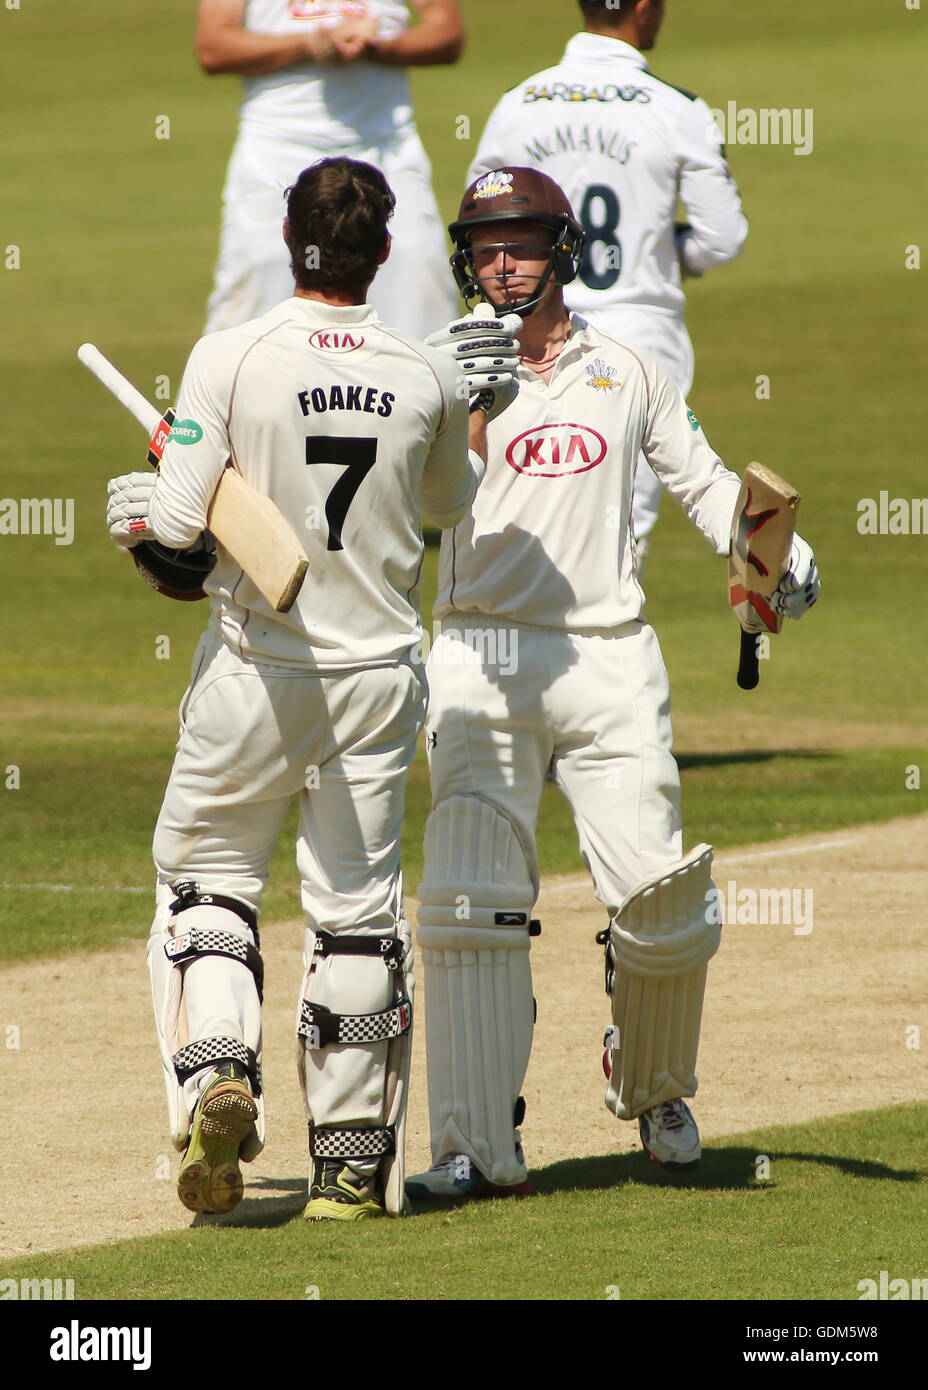 18.07.2016. The Ageas Bowl, Southhampton, England. Specsavers County Championship Cricket. Hampshire versus Surrey. Surrey's Ben Foakes is congratulated by partner Gareth Batty as he reaches One Hundred runs Stock Photo